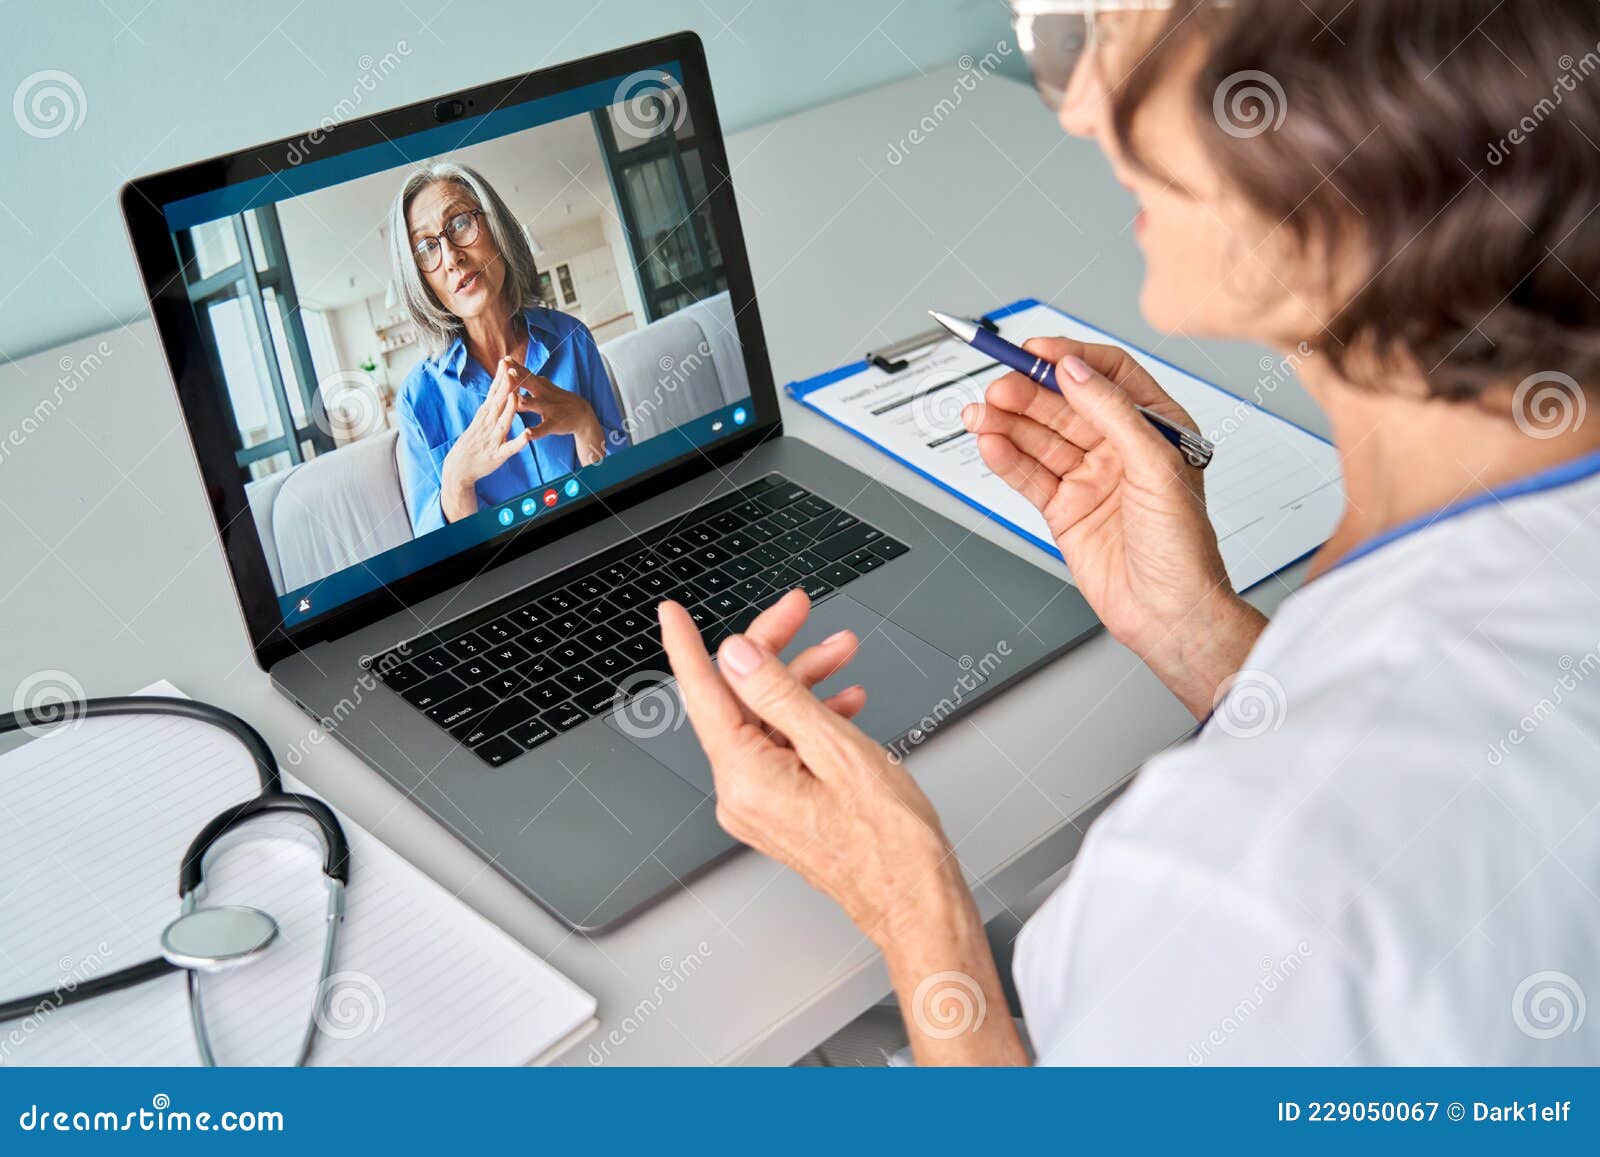 female doctor consulting older senior patient during virtual video call visit.